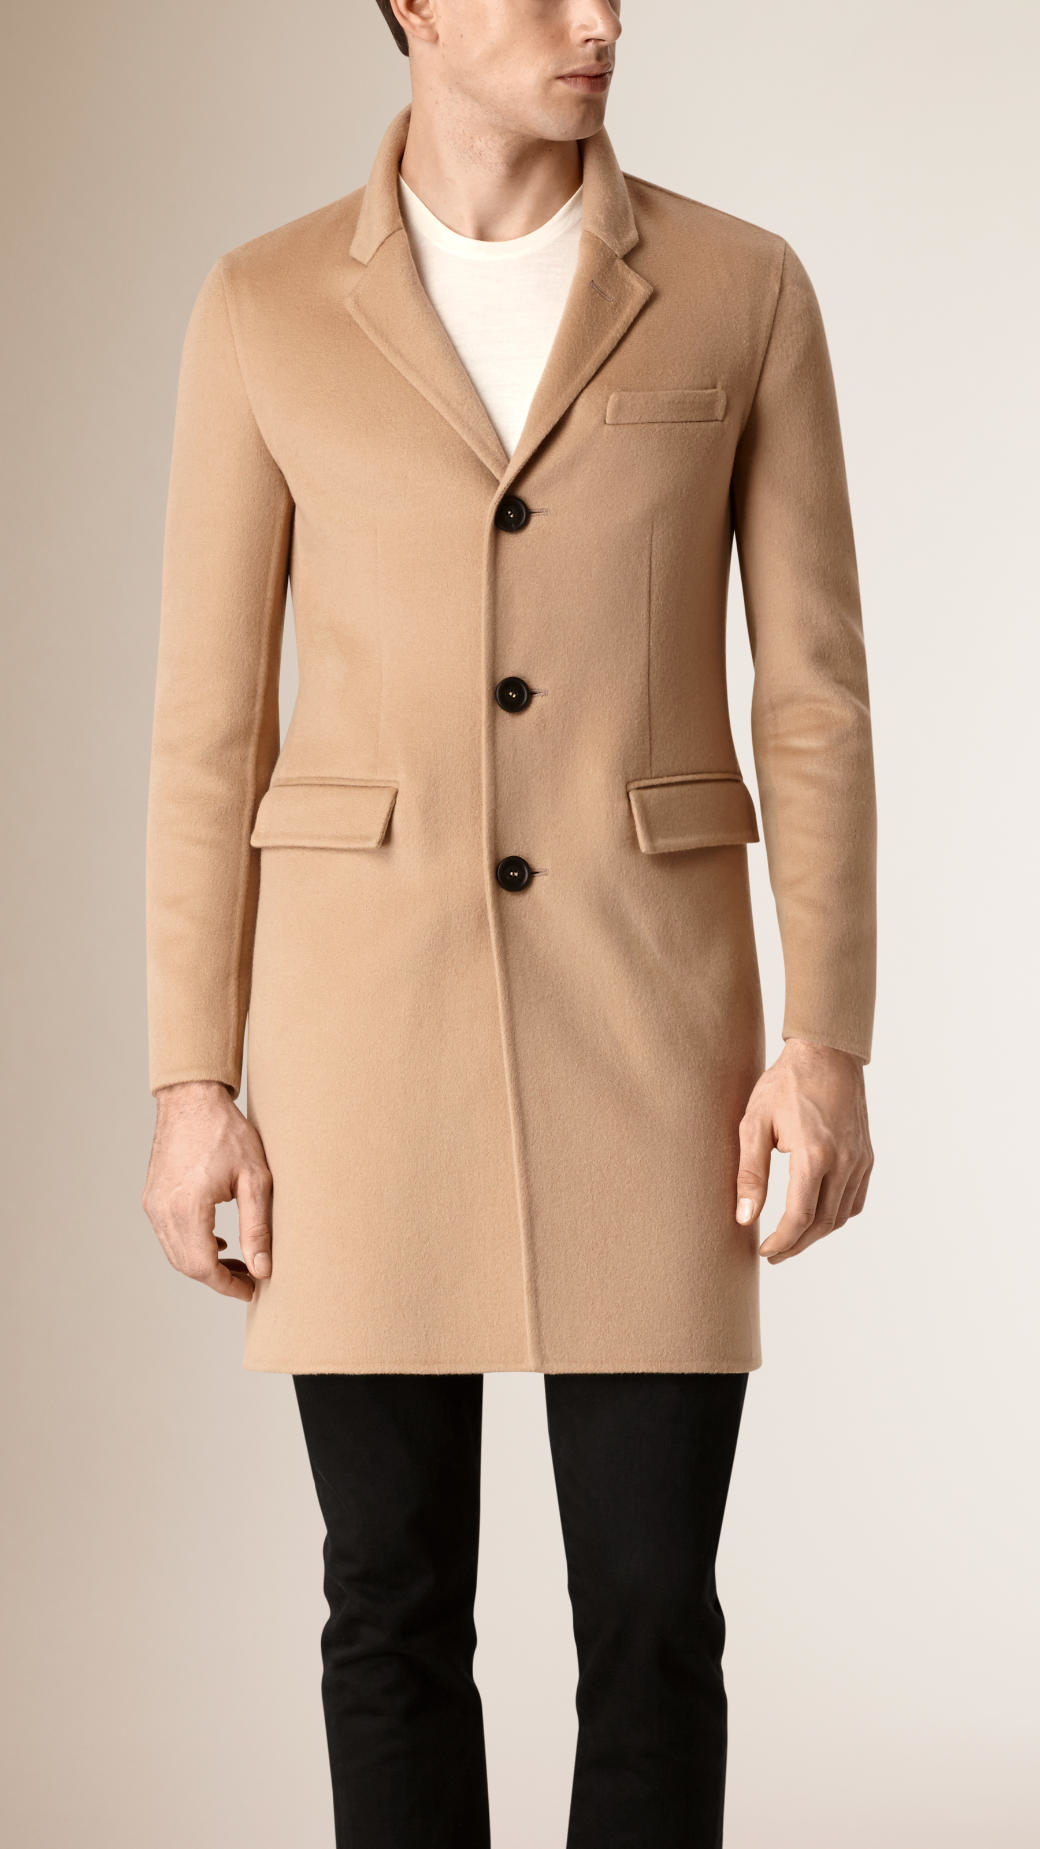 Burberry Tailored Cashmere Coat in 